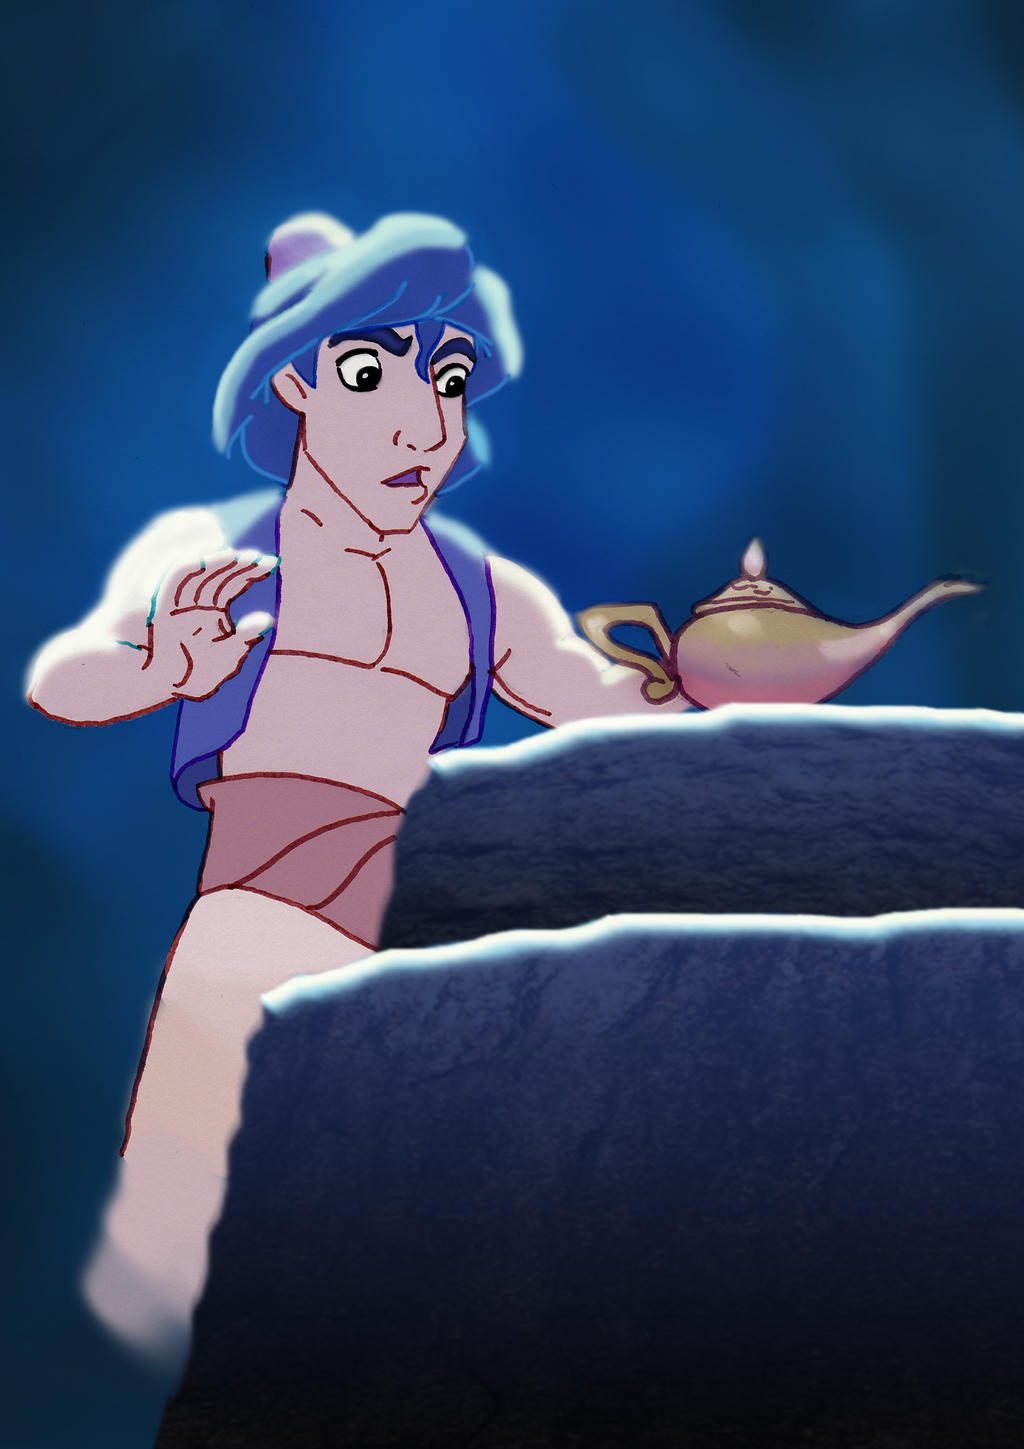 Aladdin and the lamp